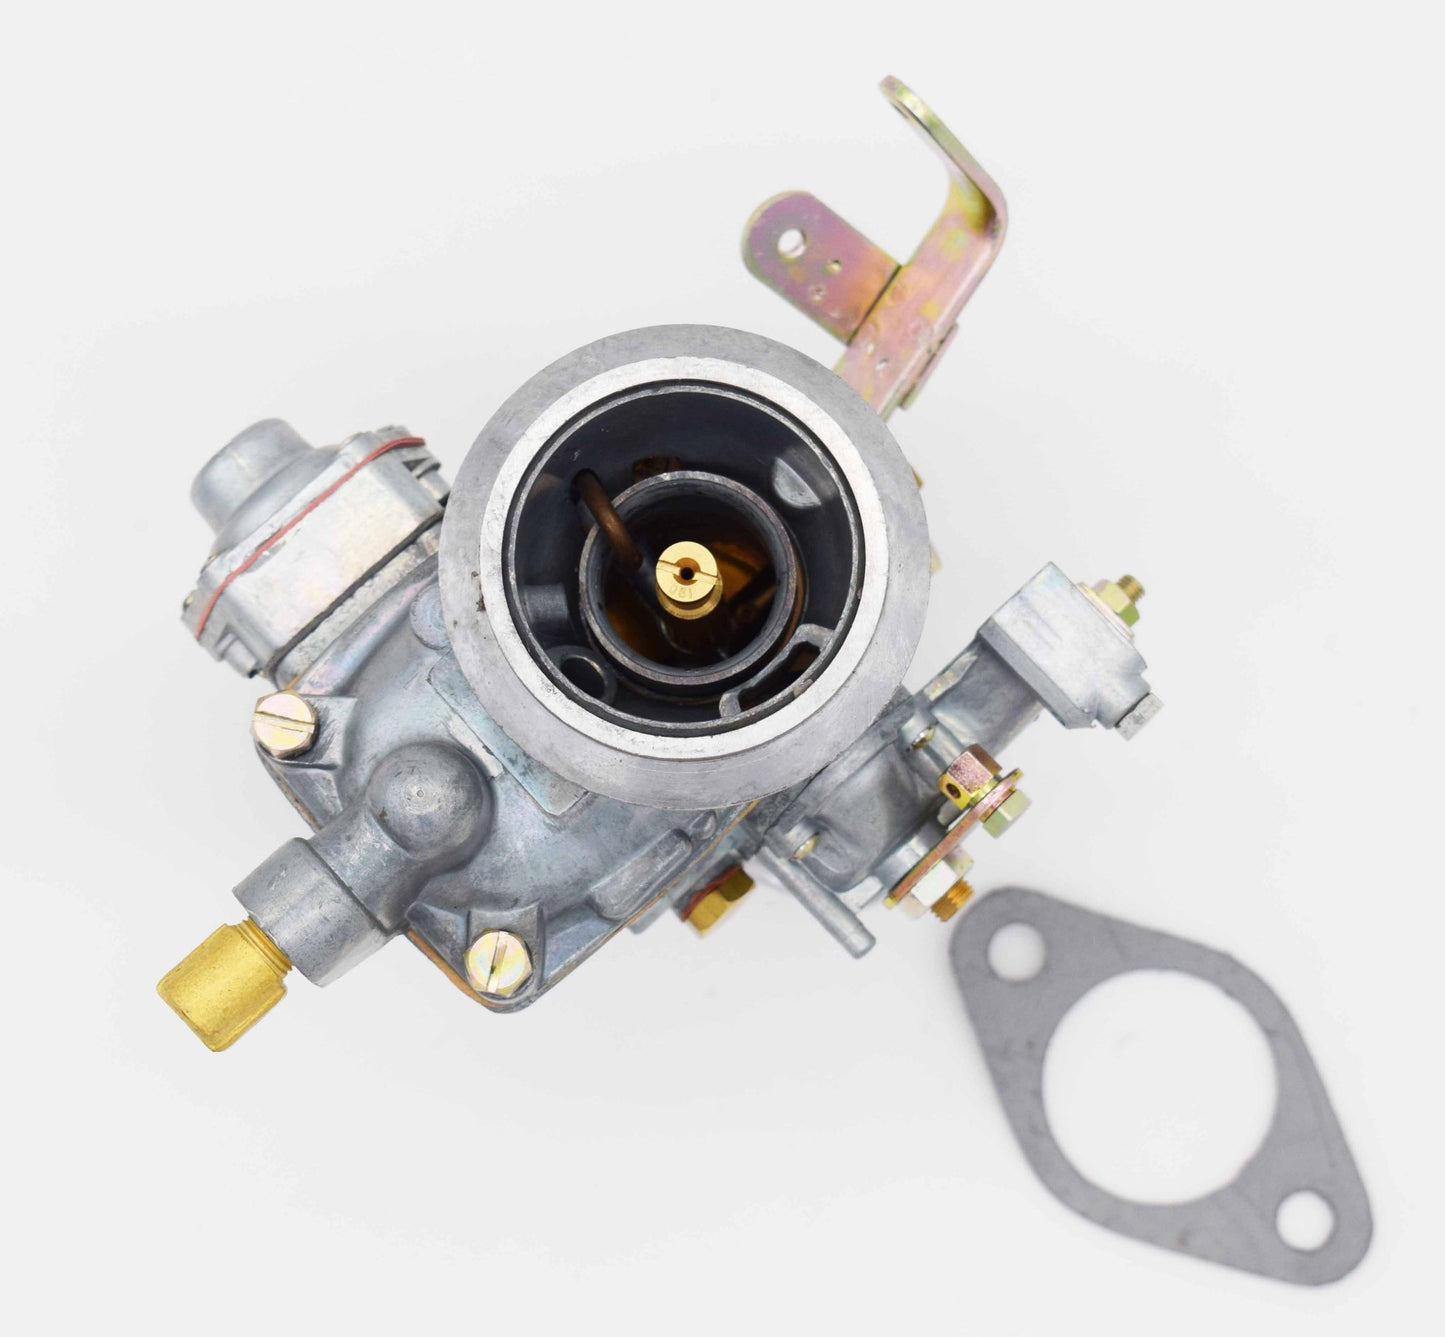 Carburetor, Solex, New Replacement, 4-134, F Head, 1953-1971 Willys & Jeep Vehicles - The JeepsterMan